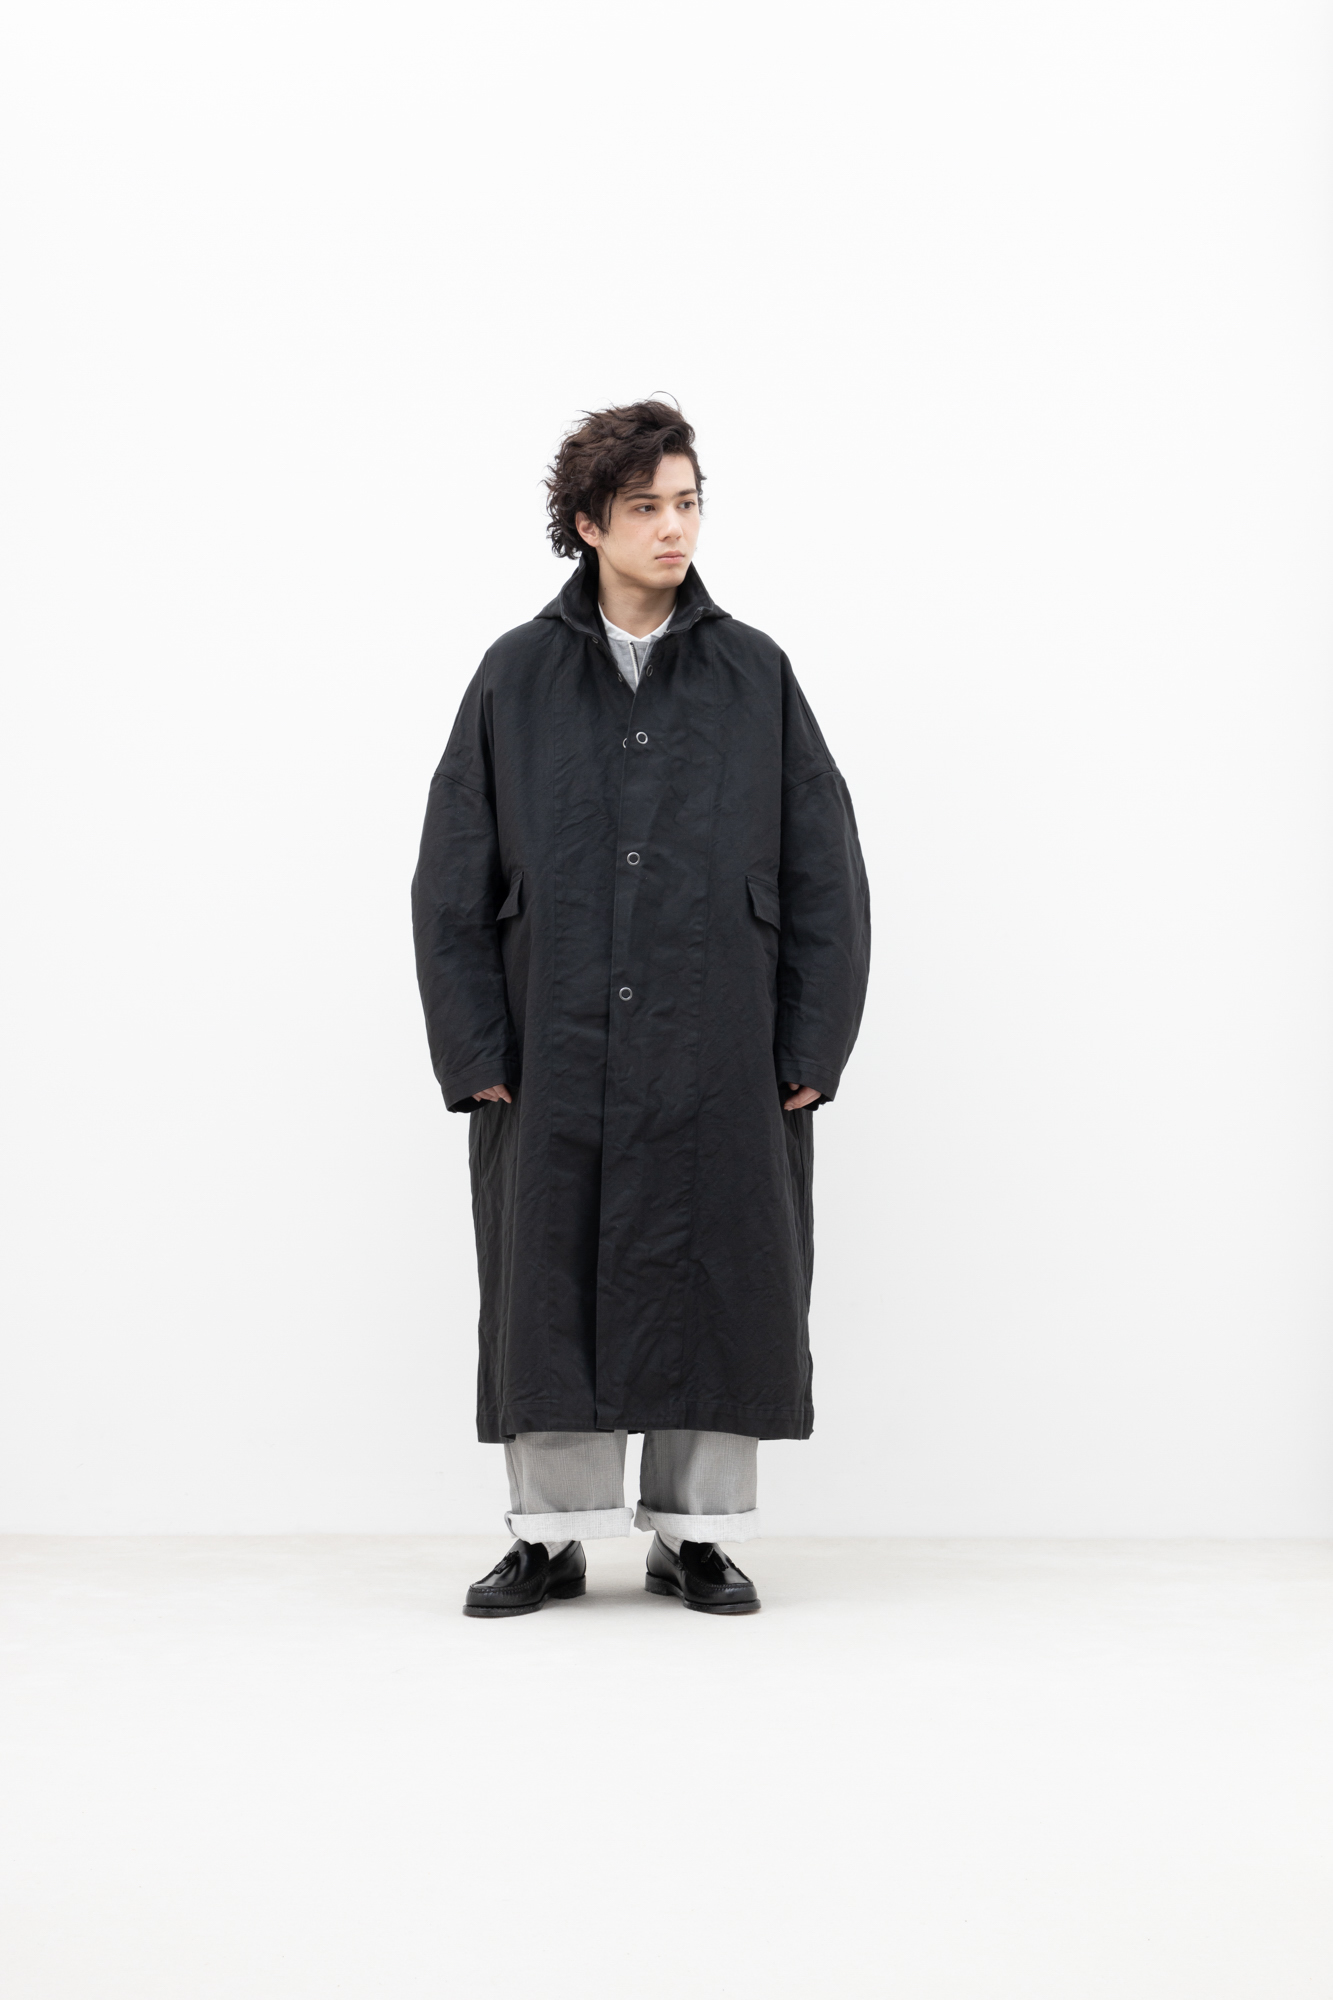 No. 009 | 2020 AW MENS | LOOK | FIRMUM